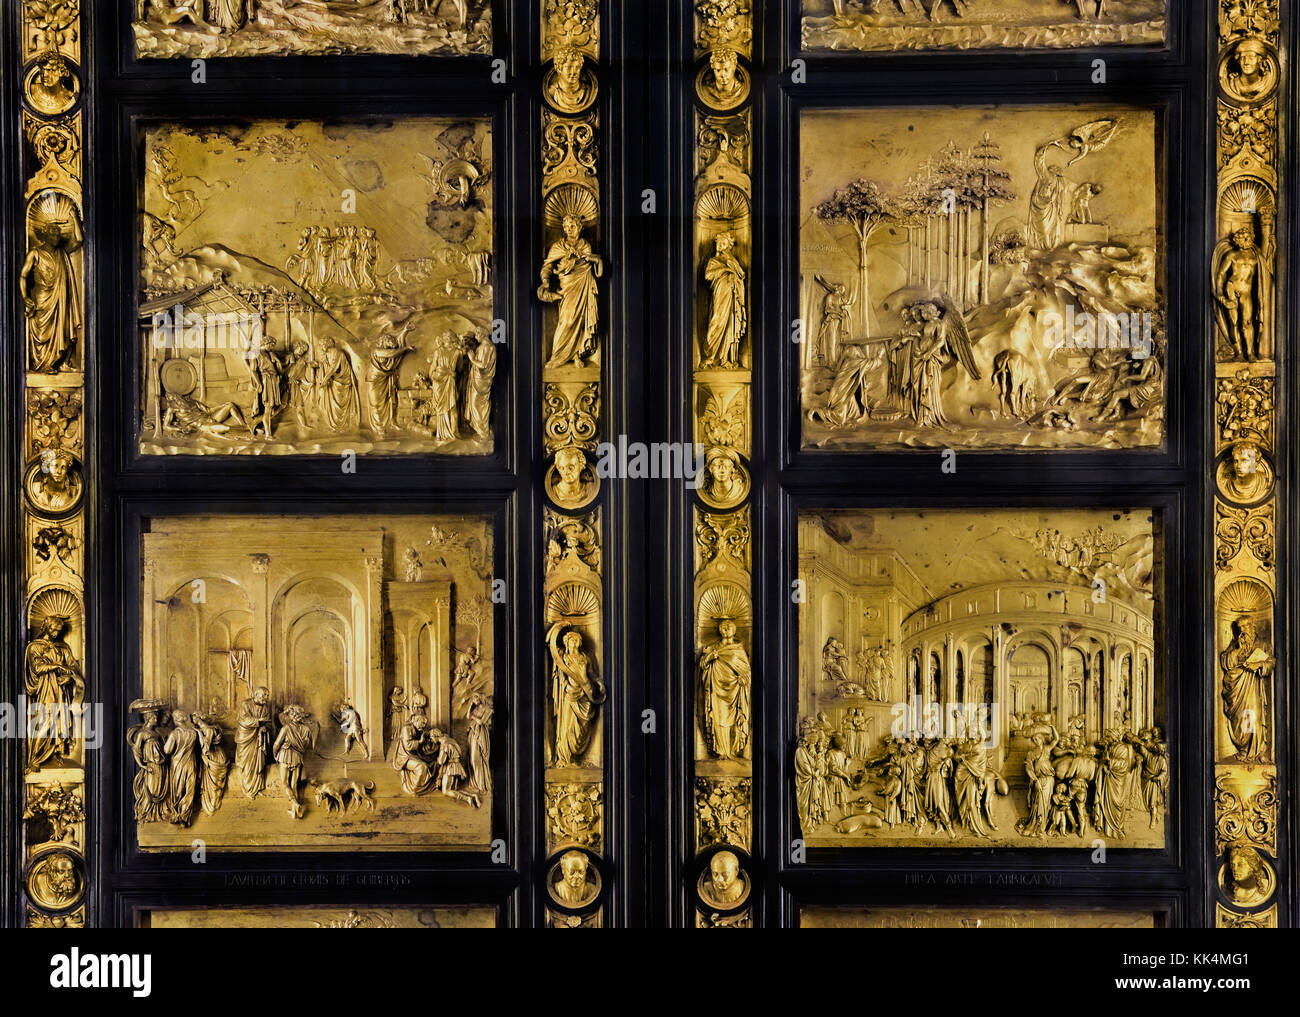 The drunkenness of Noah, Abraham and Isaac, Esau and Jacob , Joseph sold into slavery -The Florence Baptistery ( Battistero di San Giovanni), Baptistery of  - Saint John,  East doors, or Gates of Paradise, by Lorenzo Ghiberti  ( The Cattedrale di Santa Maria del Fiore of Florence - Cathedral of Saint Mary of the Flower 1336 )  Museo dell'Opera del Duomo Florence Italy Italian. (original door panel ) Stock Photo